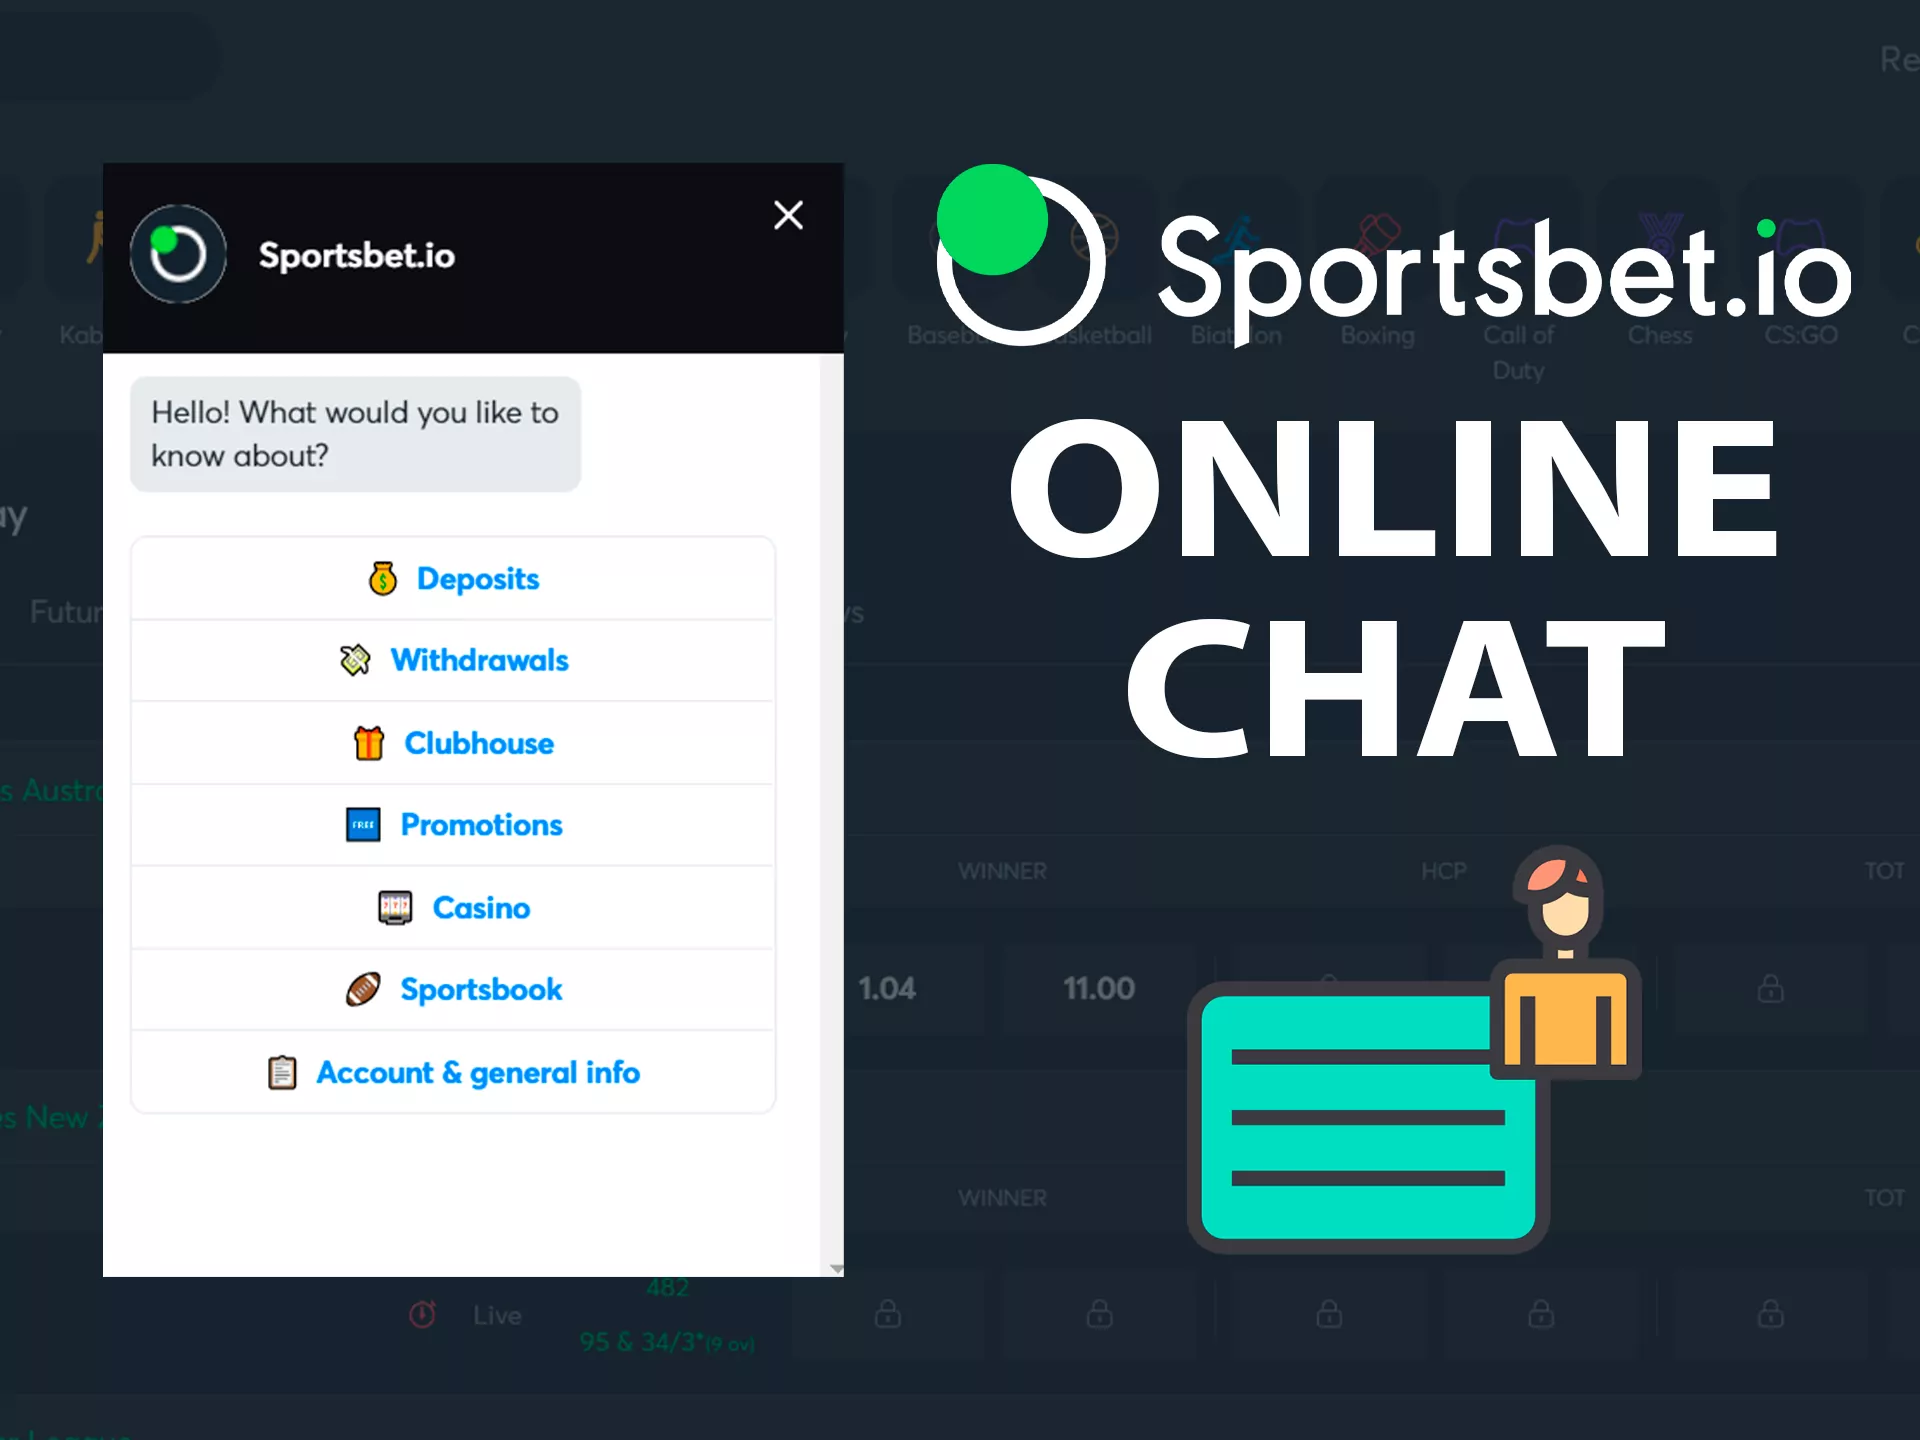 On-site chat is a quicker way to reach the Sportsbet support.